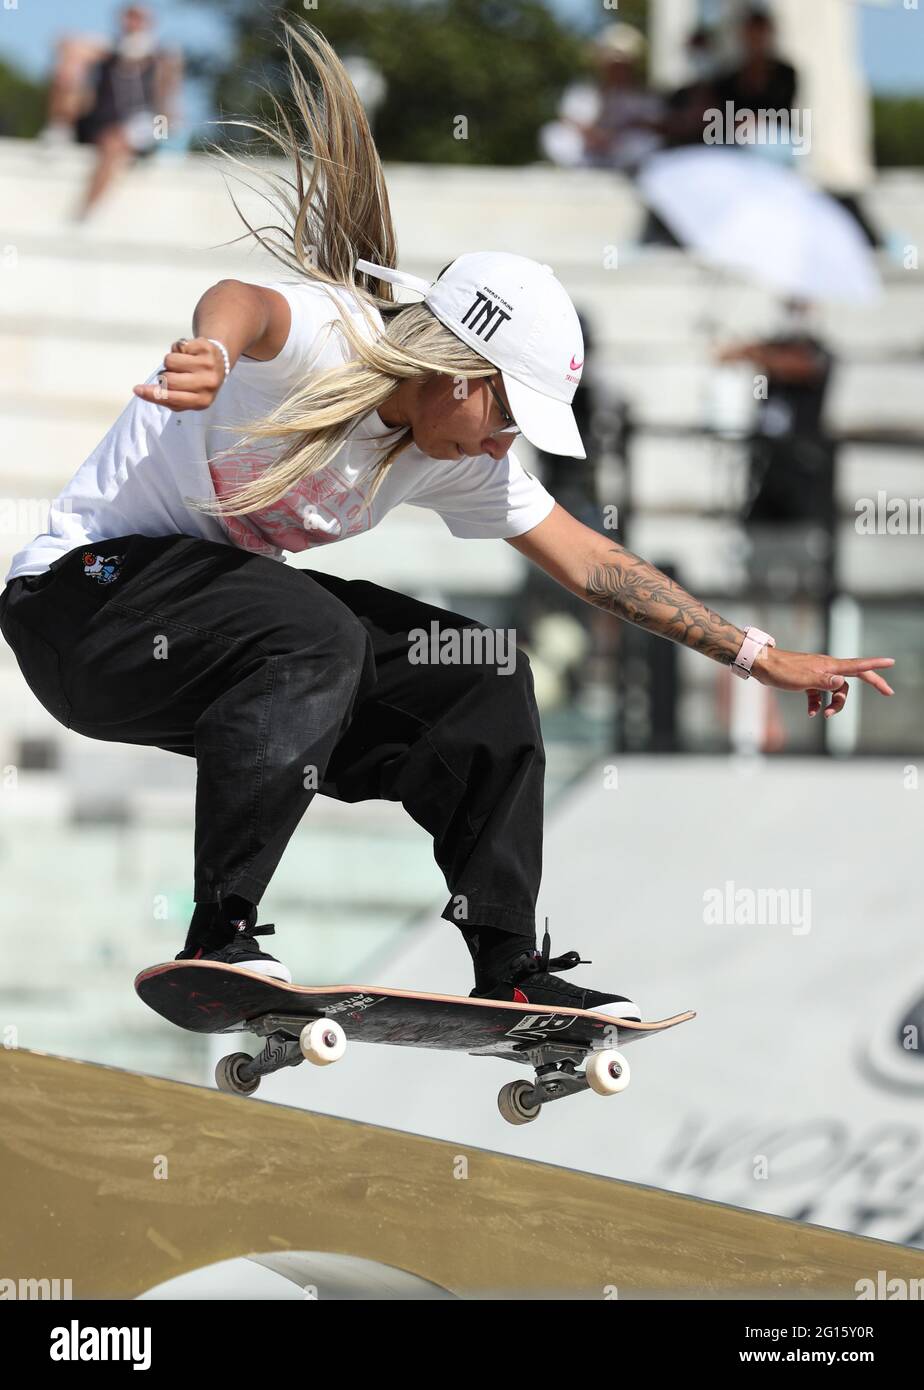 Rome, Italy. 4th June, 2021. Pamela Rosa of Brazil competes during the  Women's Semifinal of the Street Skateboarding World Championships, a  qualifying event for Tokyo Olympic Games, in Rome, Italy, June 4,